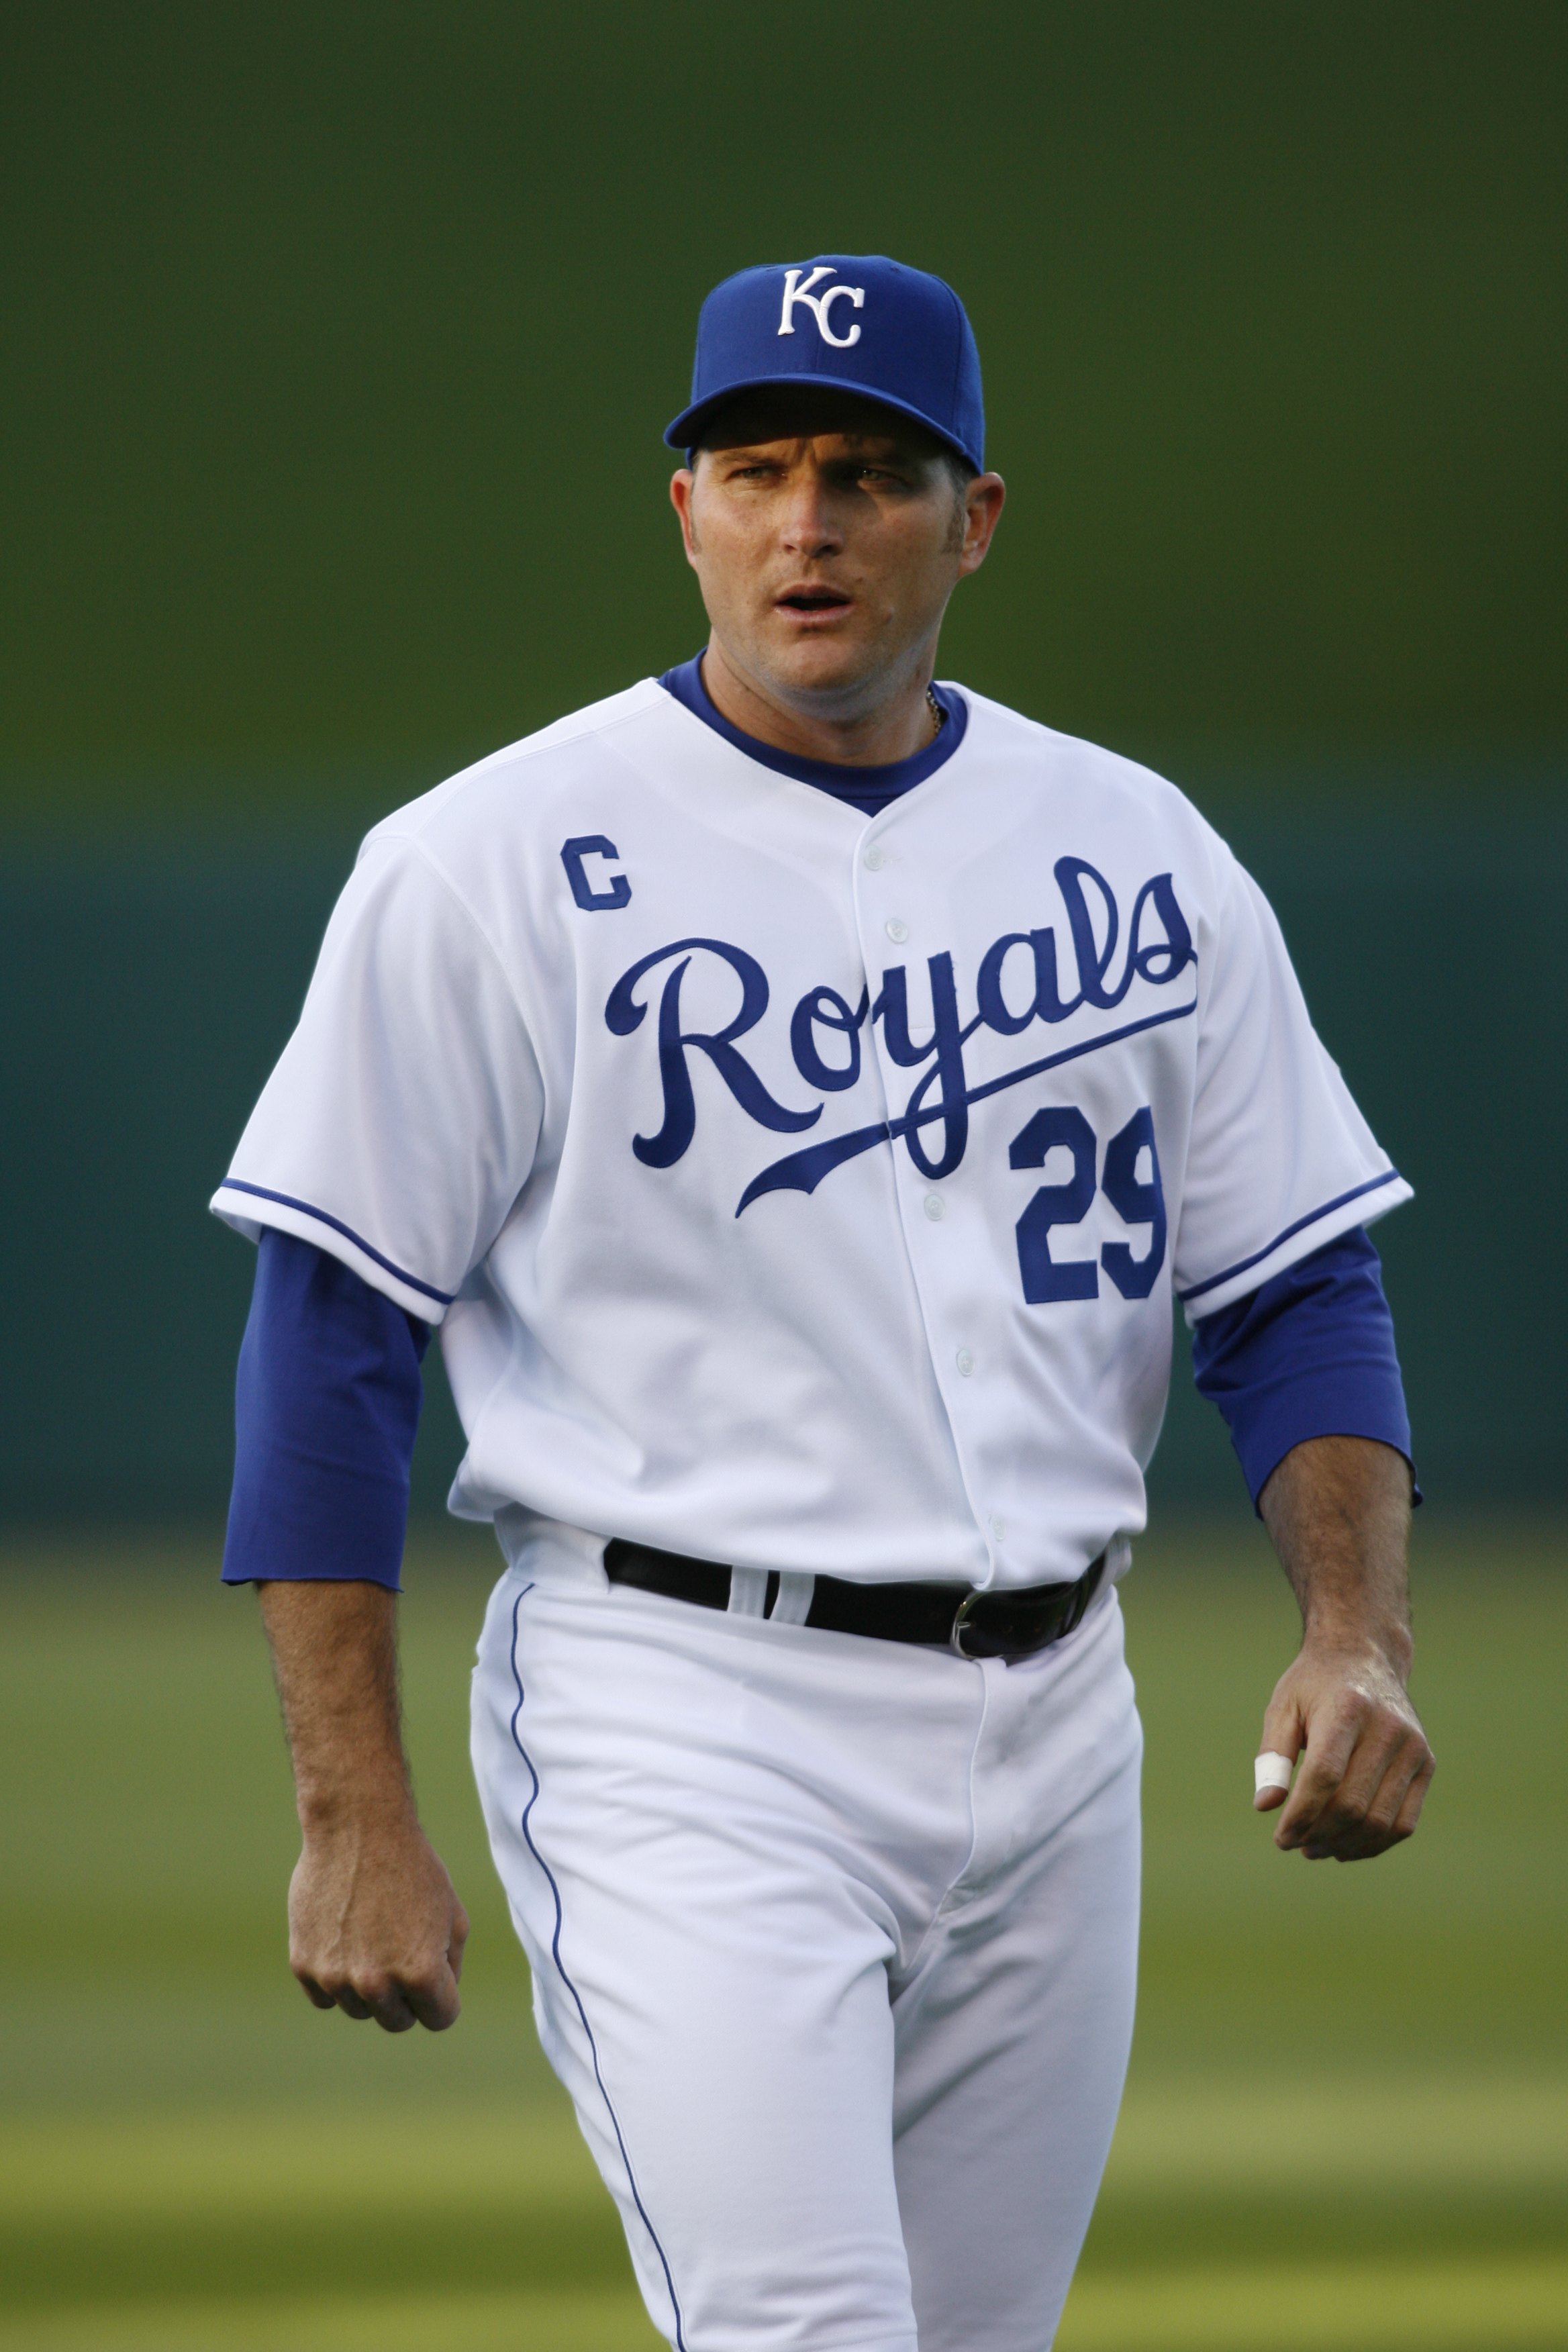 Kansas City Royals induct Mike Sweeney into franchise Hall of Fame - ESPN